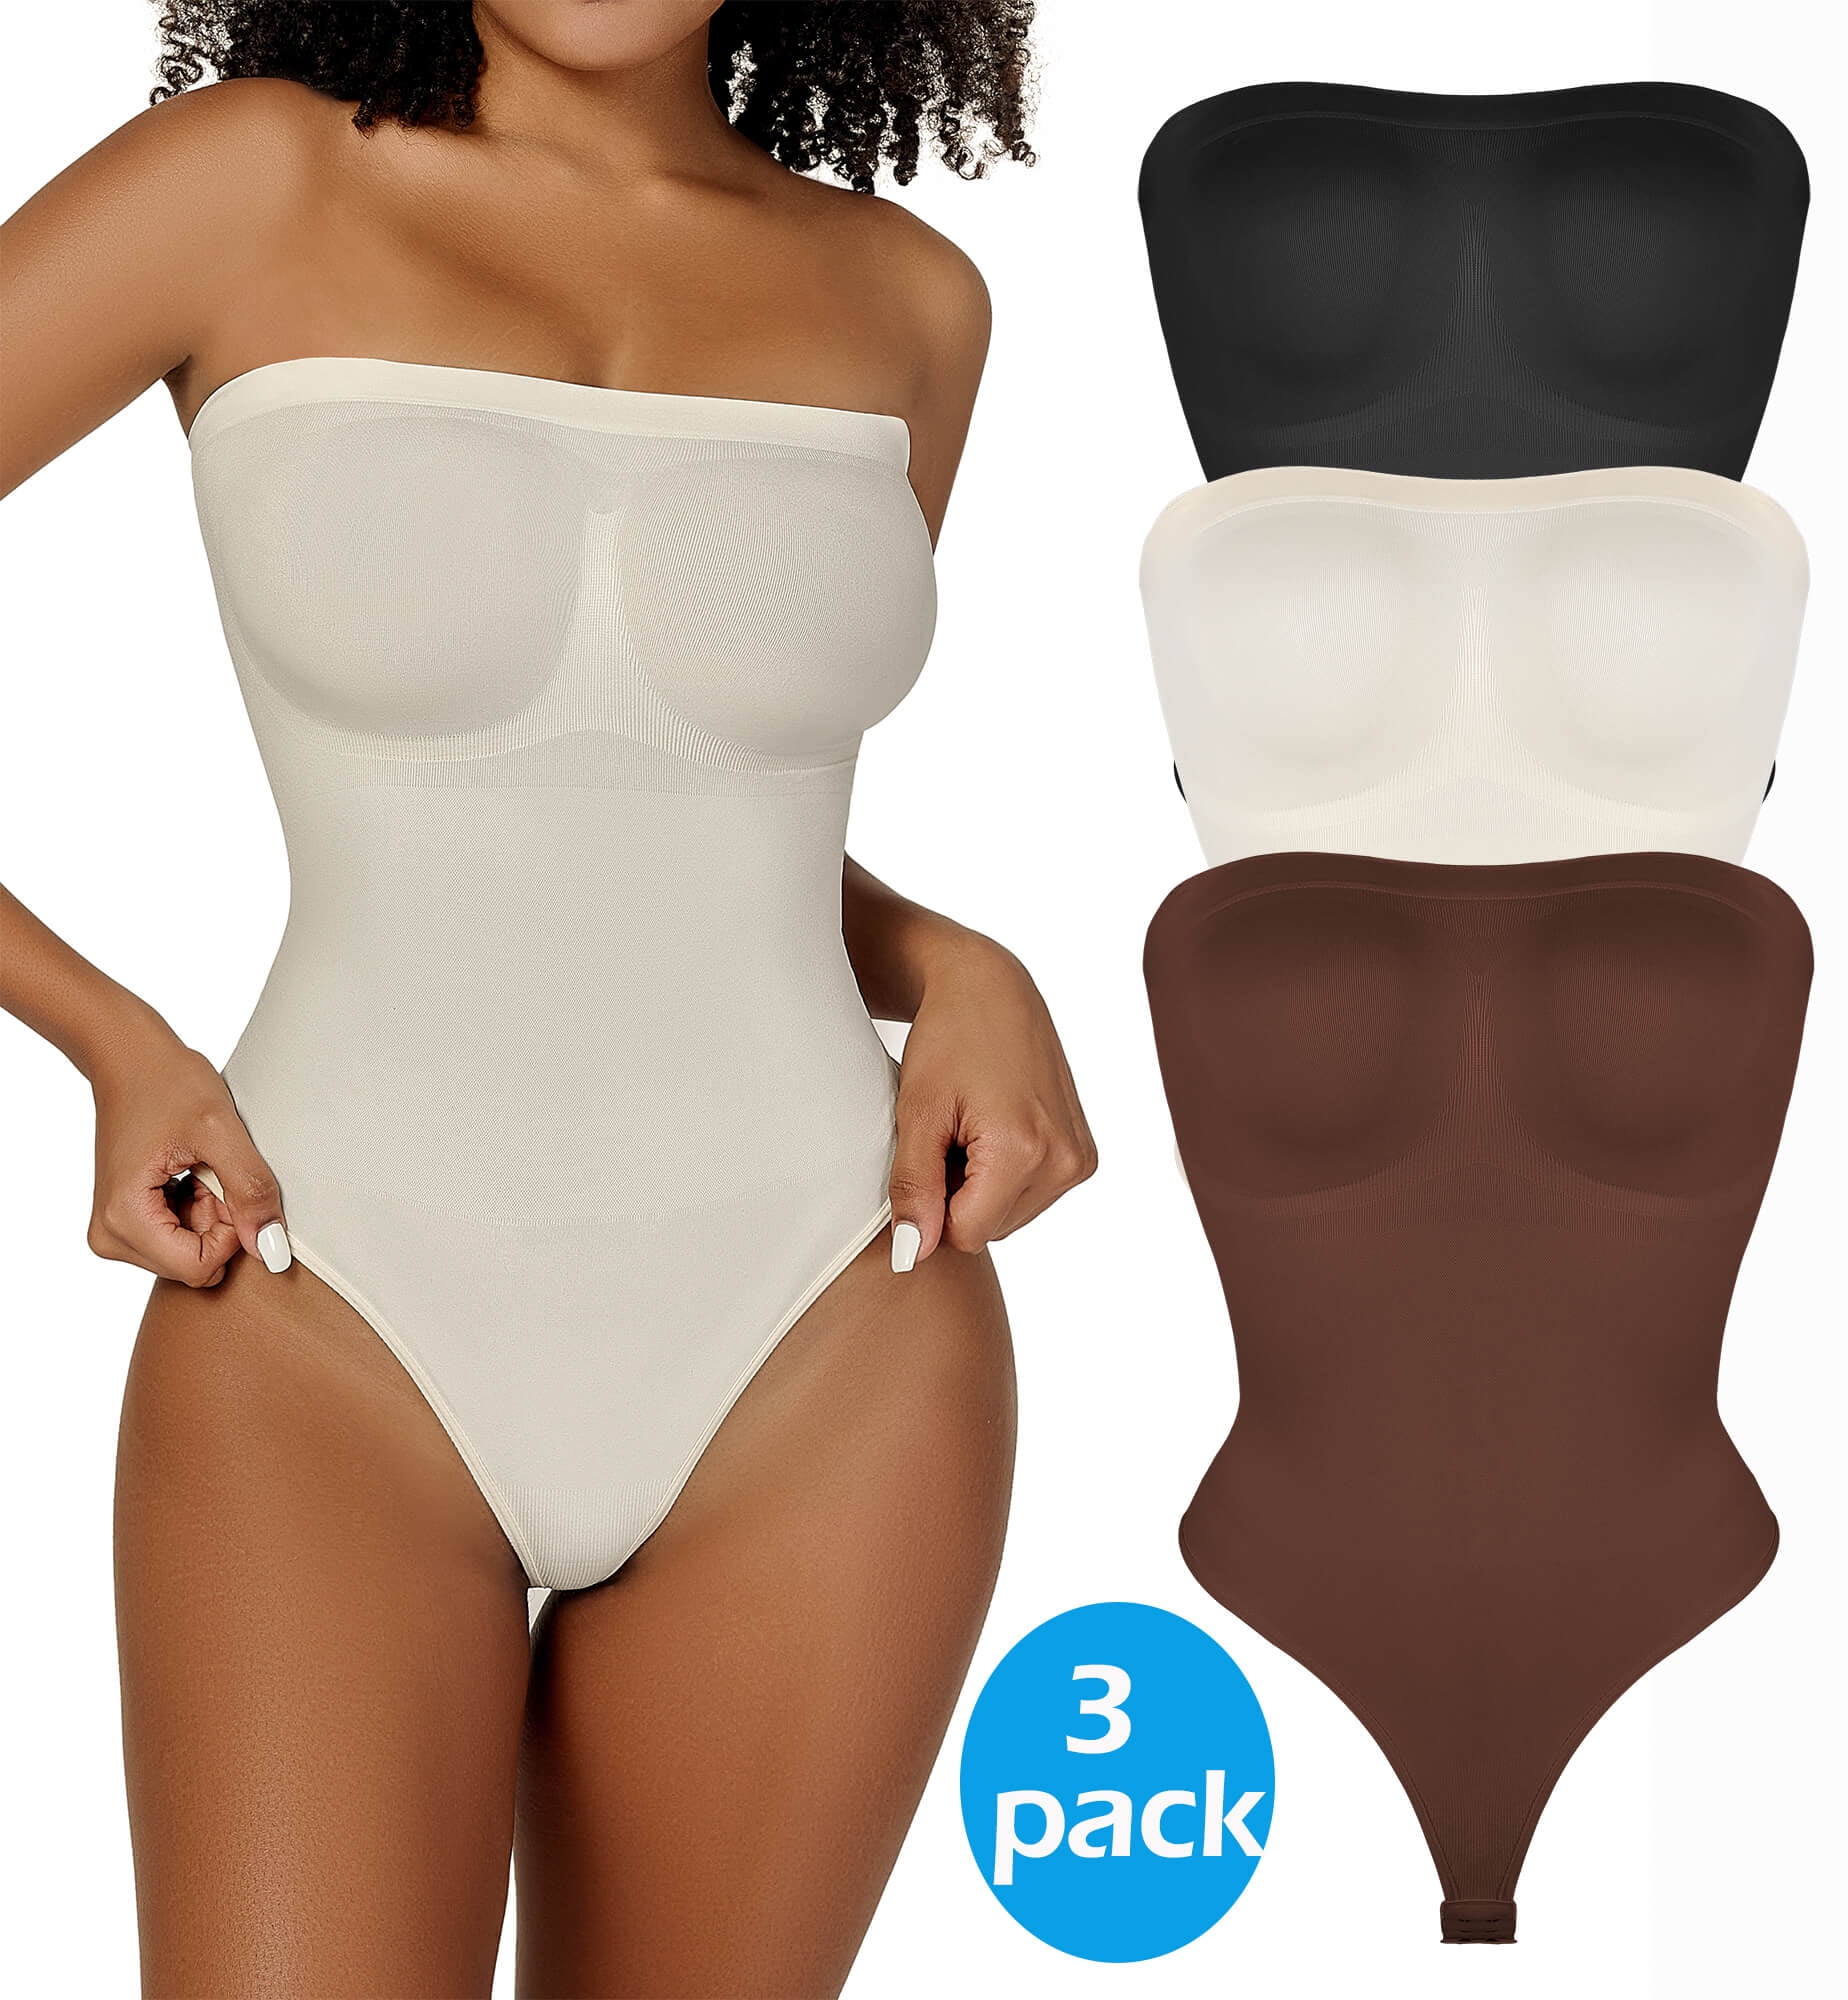 InstantFigure Women's Firm Control Shaping Strapless Bandeau Body Brief  Bodysuit 